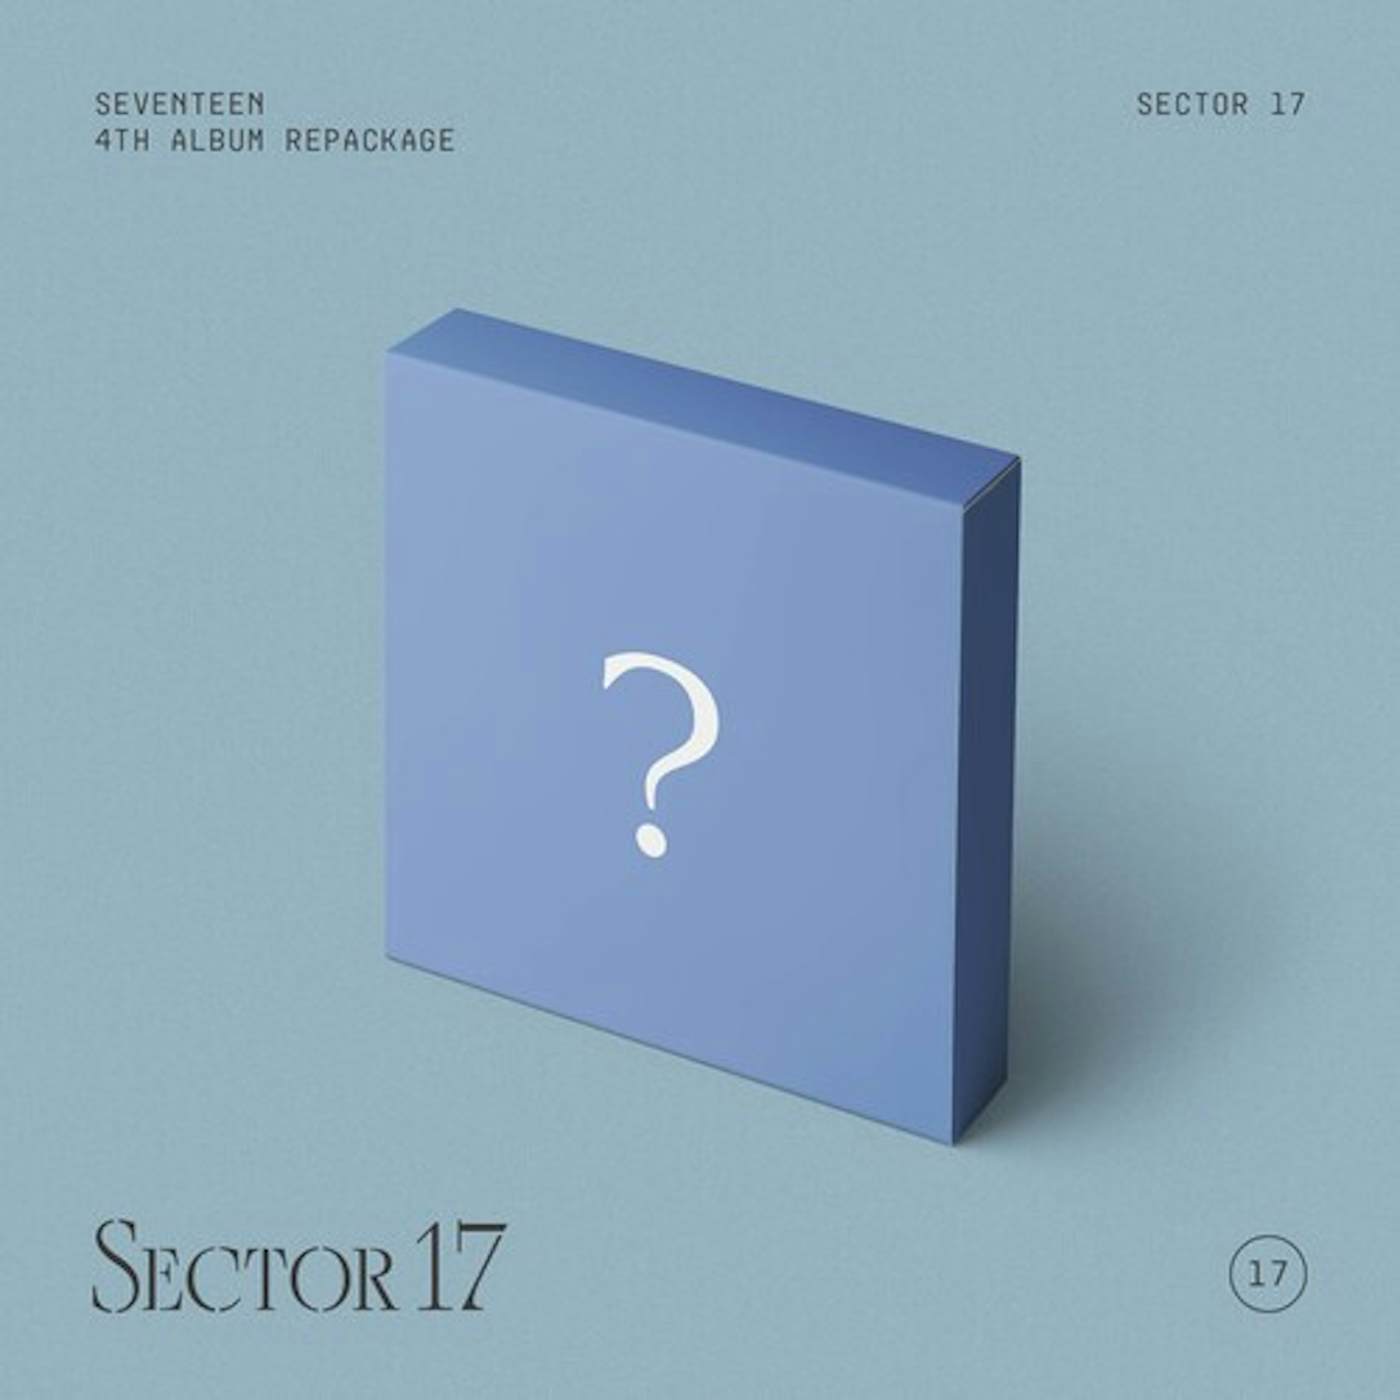 SEVENTEEN SECTOR 17 - 4TH ALBUM REPACKAGE (NEW HEIGHTS VER.) CD